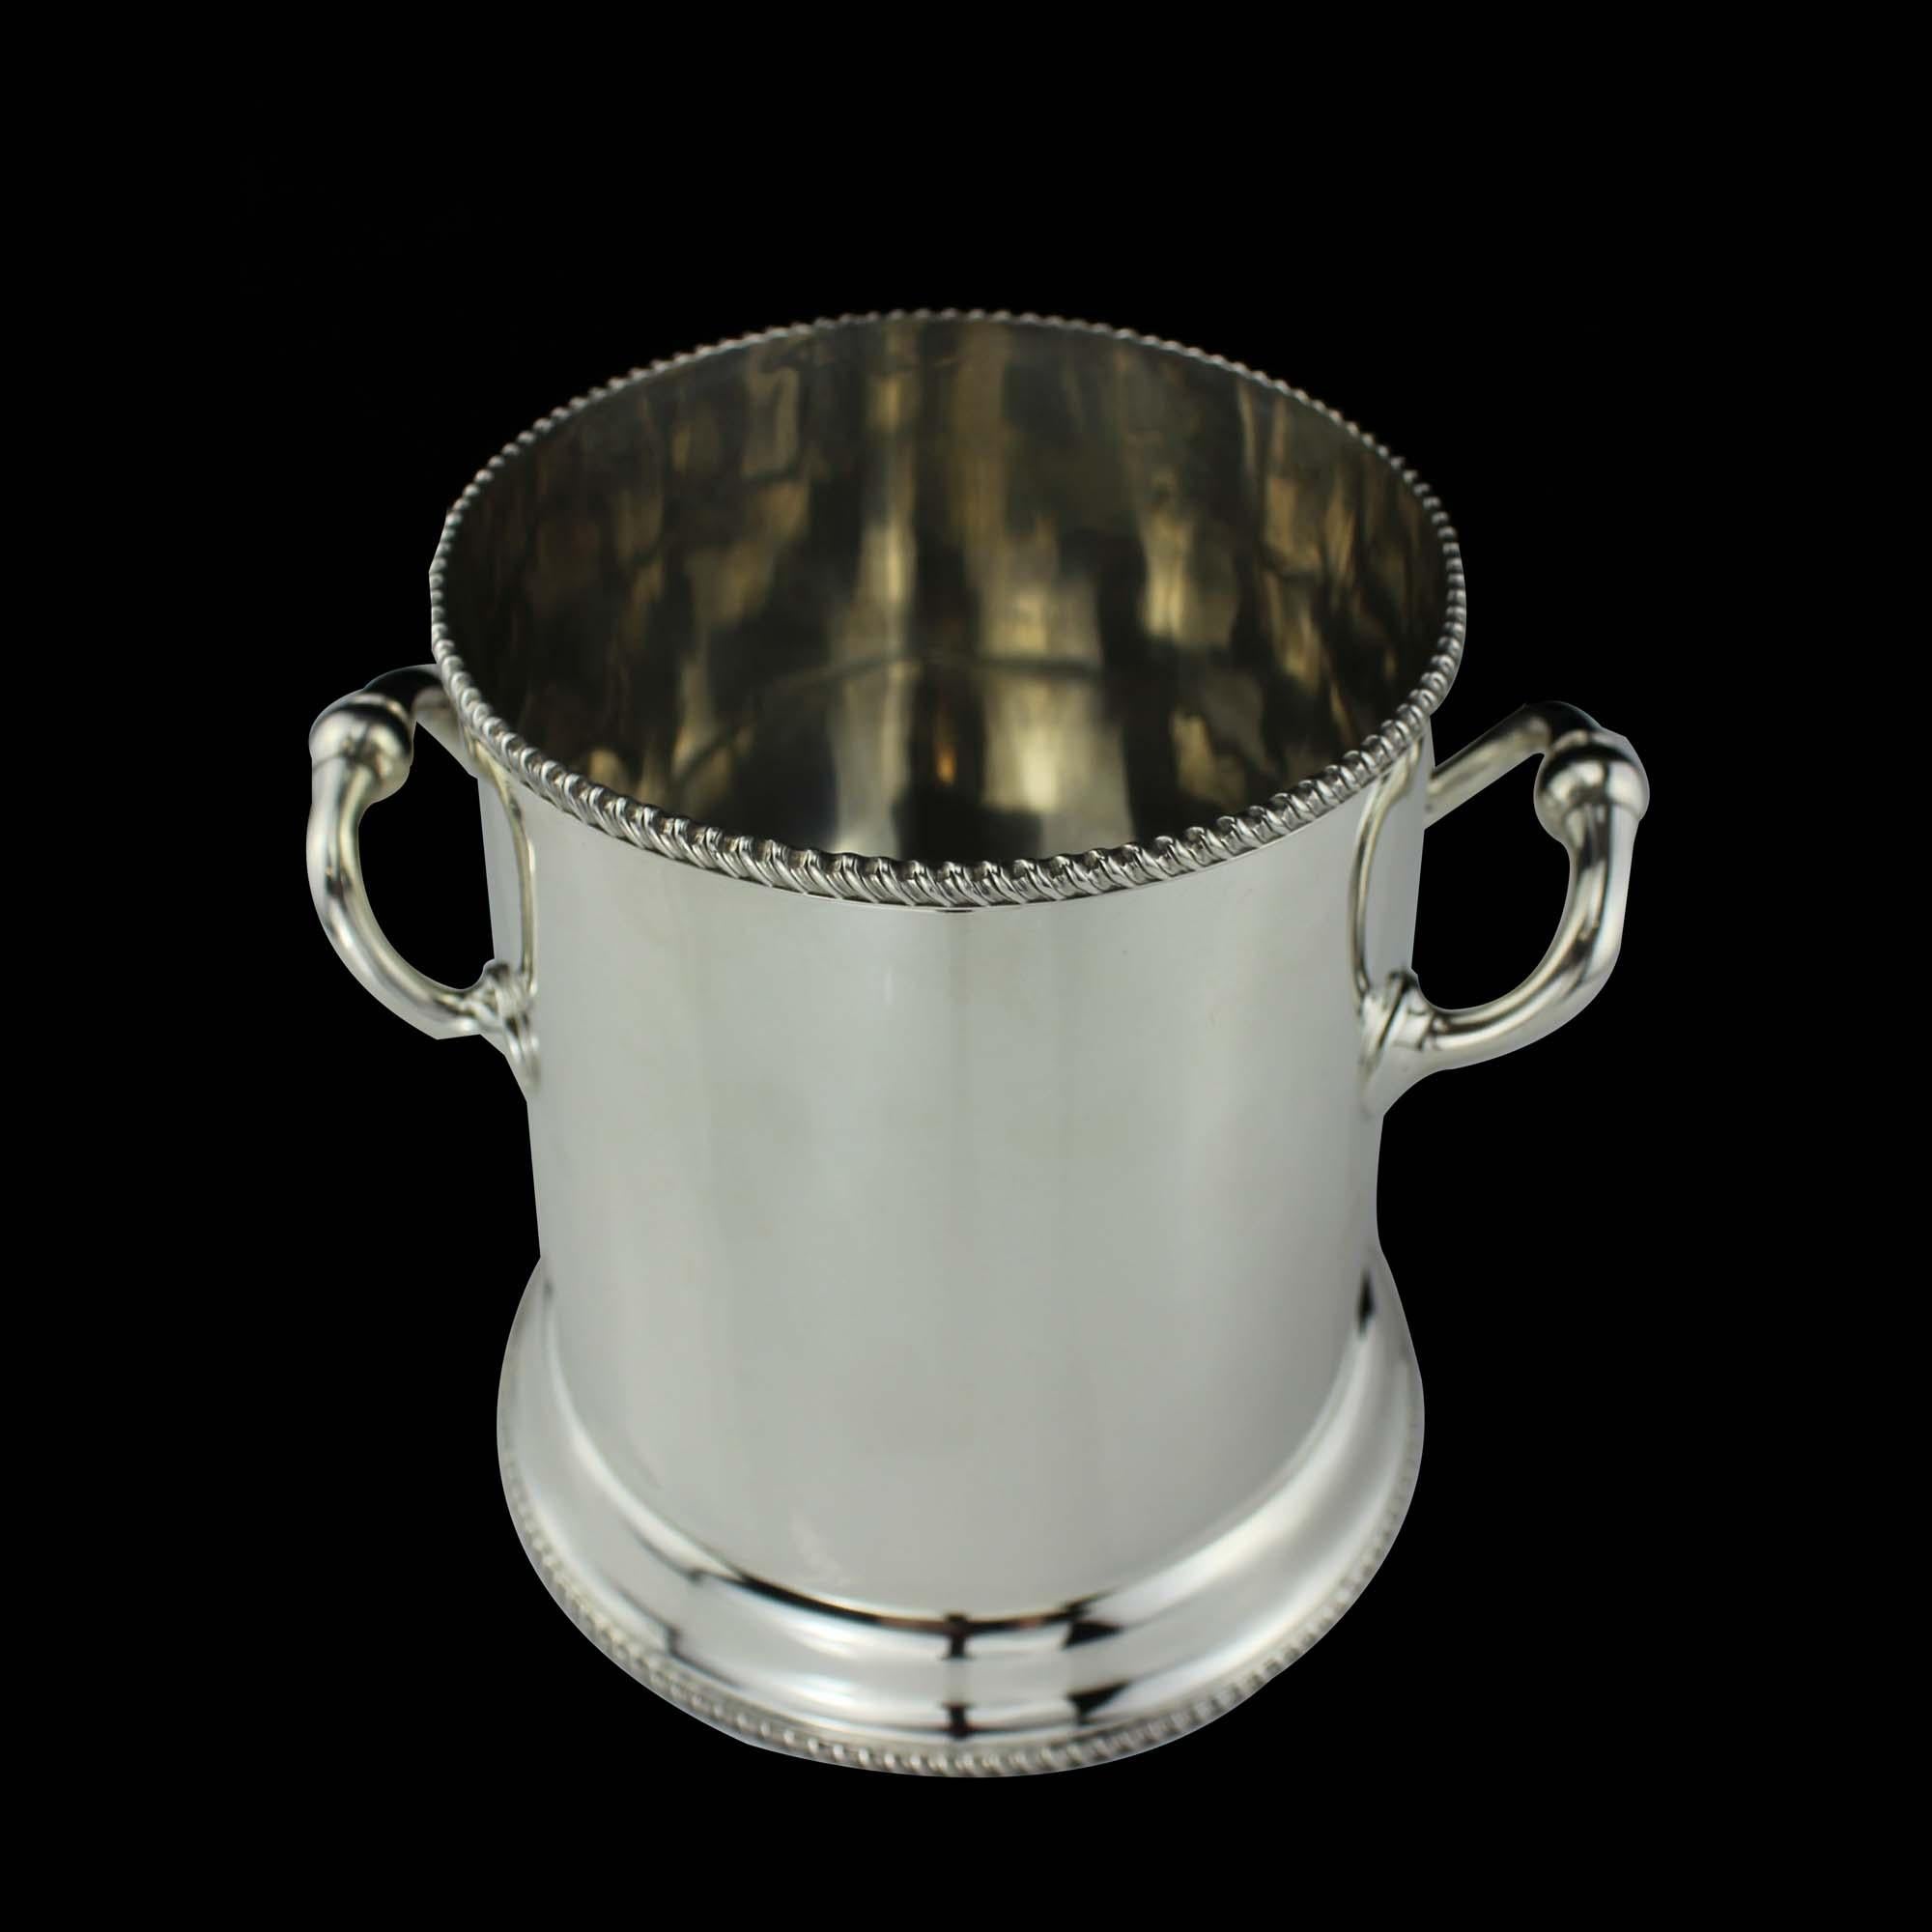 Antique Edwardian ice bucket 

 Maker: Atkin brothers
 Made in: England, Sheffield, 1905
 Fully hallmarked.

 Dimensions - 
 Diameter x height: 13.5 x 15 cm 
 Weight: 539 g

 Condition: Item is in general usage , has age related wear and